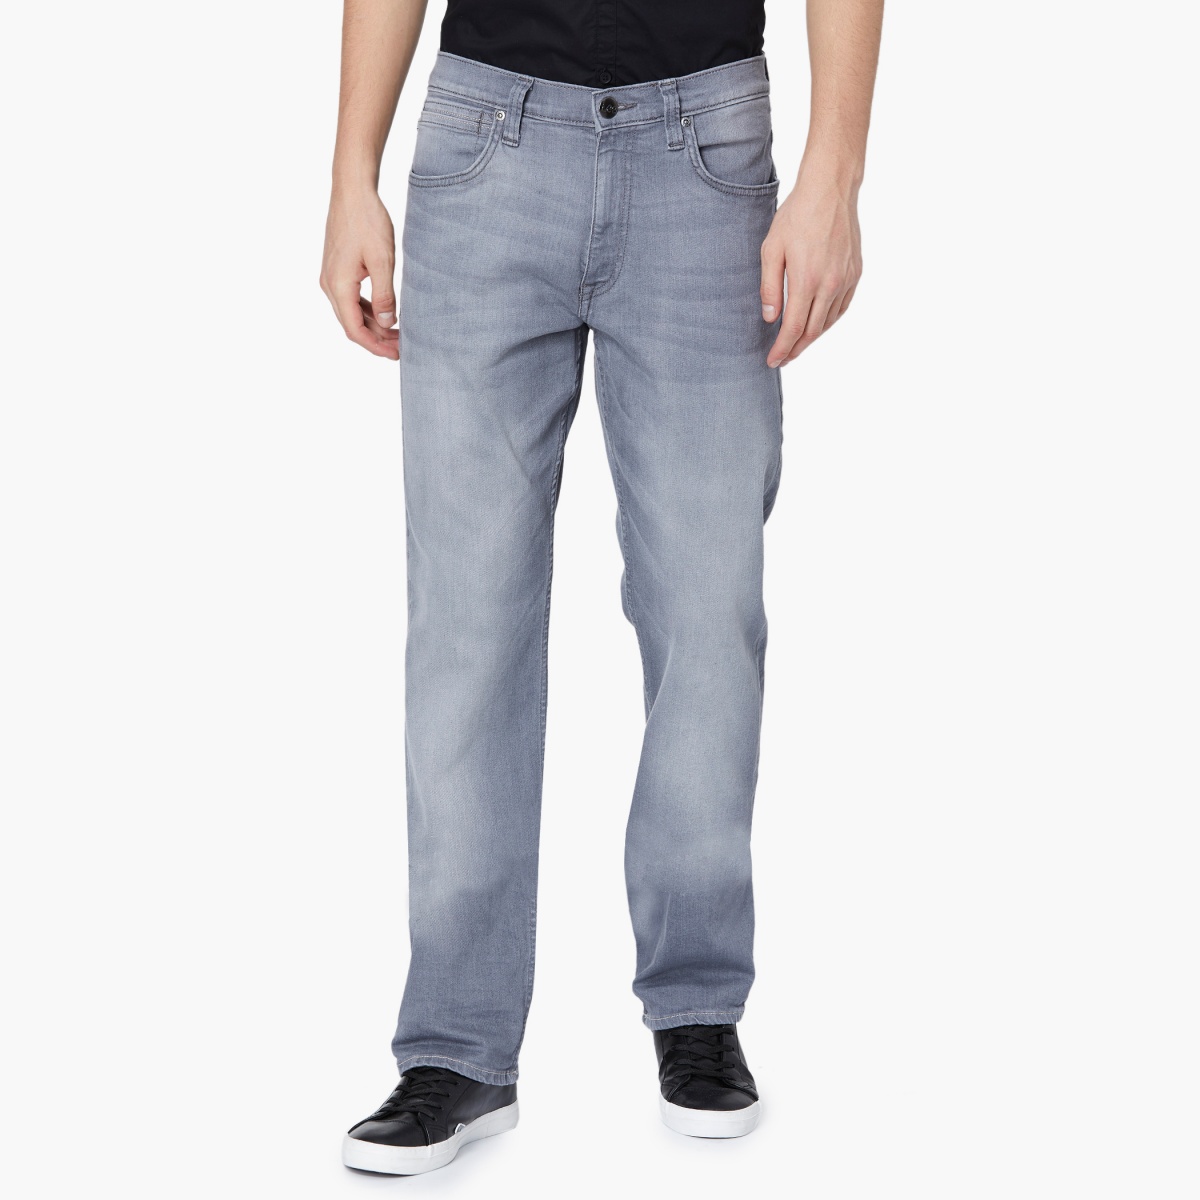 LEE Stonewashed Mid Rise Regular Fit Jeans